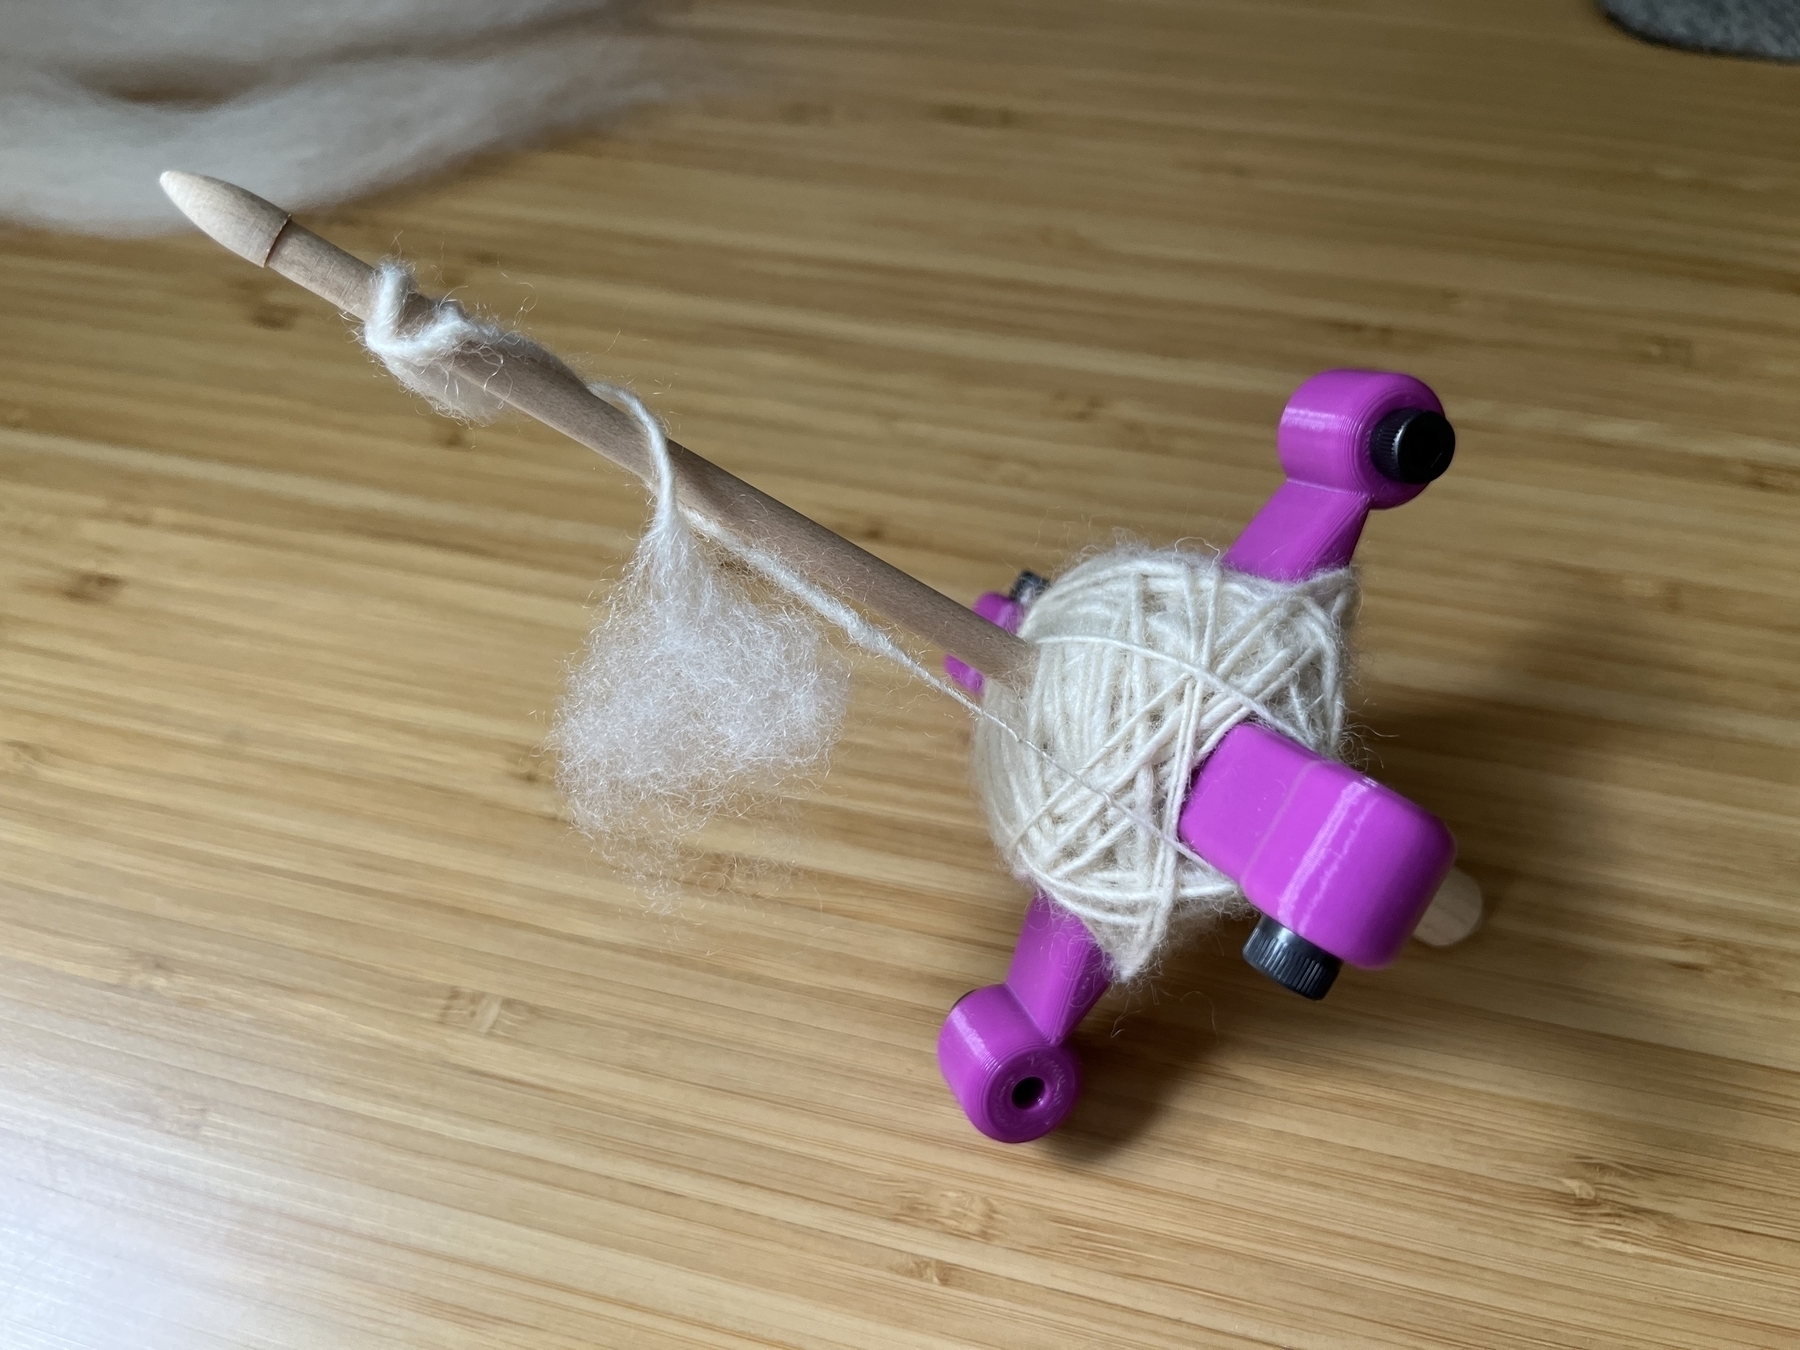 A wooden spindle with 3D printed arms formed into a cross at the bottom of the spindle. A ball of white yarn is partially wound on to the crossed arms. 